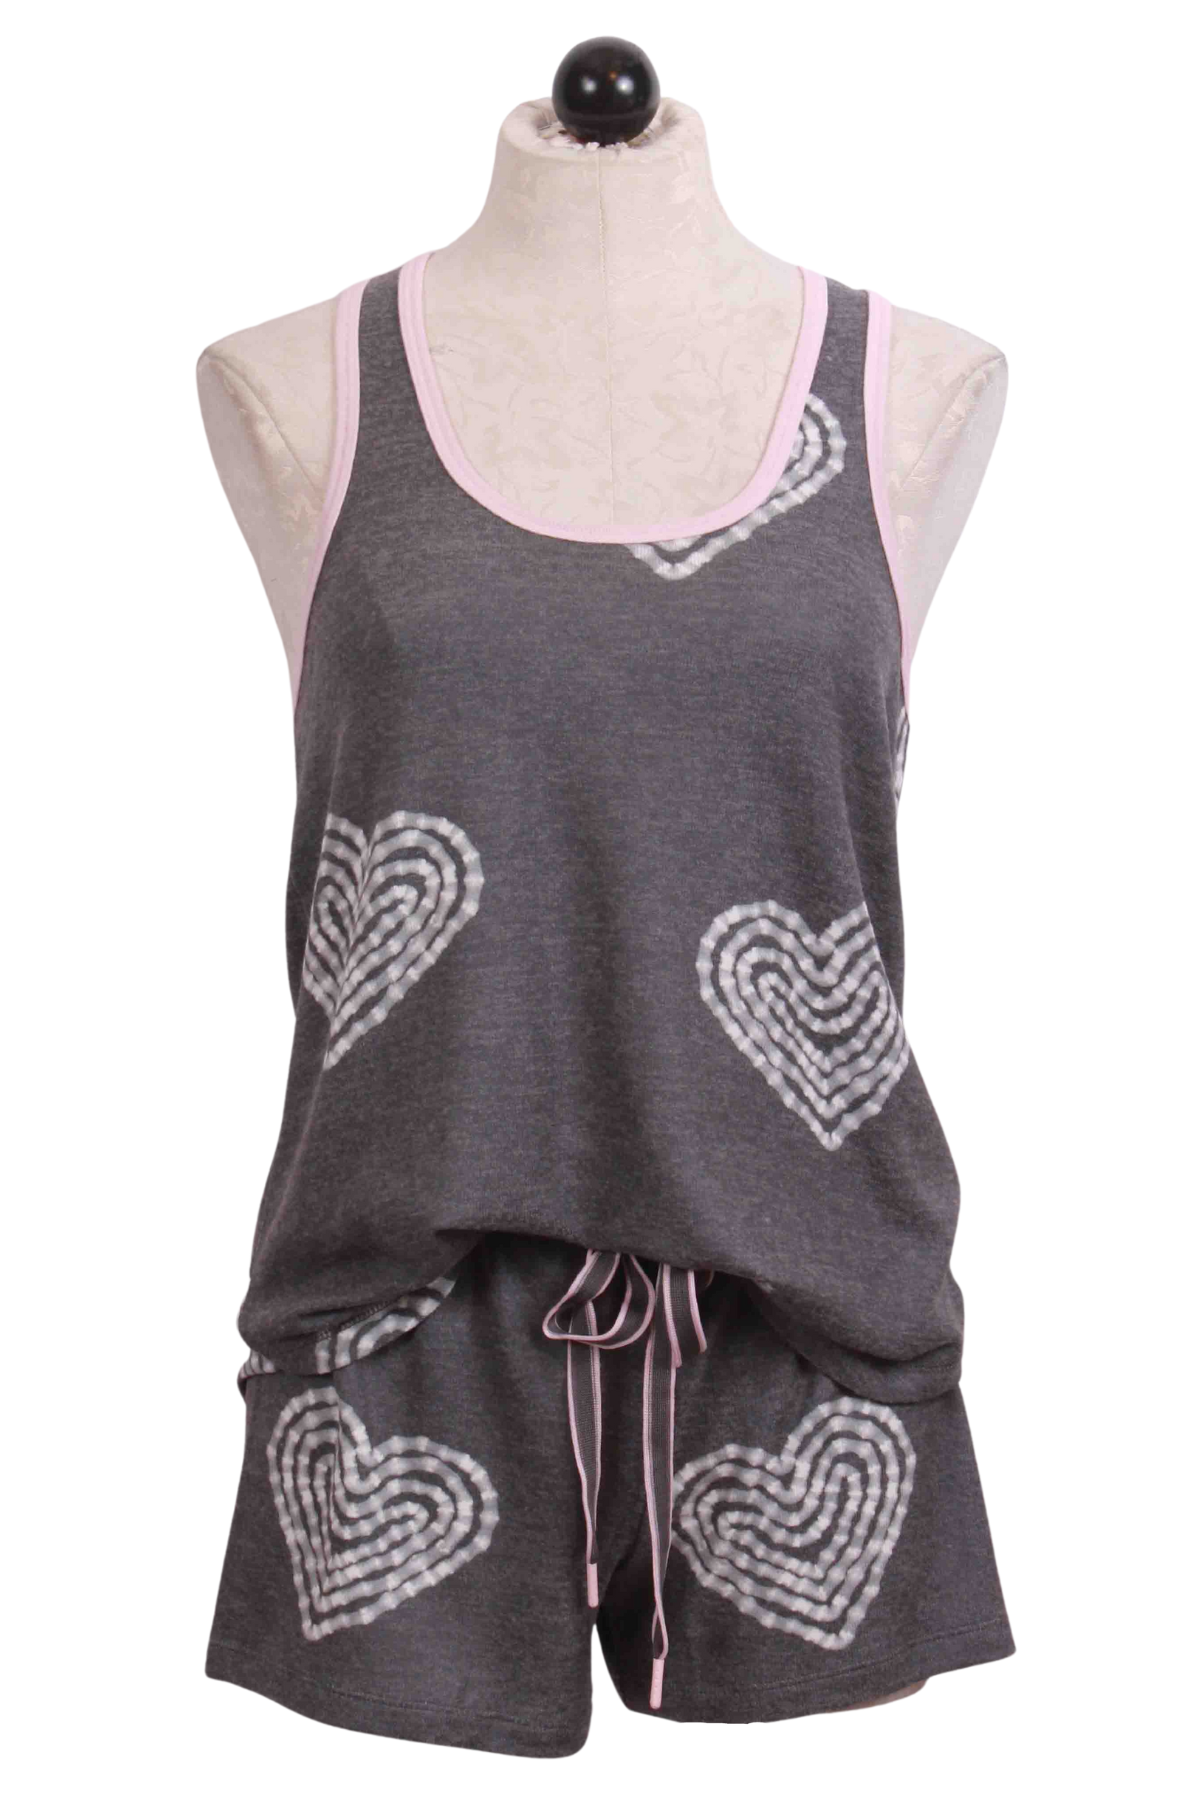 Heather Charcoal Bless Your Heart Short by PJ Salvage paired with the matching PJ Salvage Bless Heart Tank Top